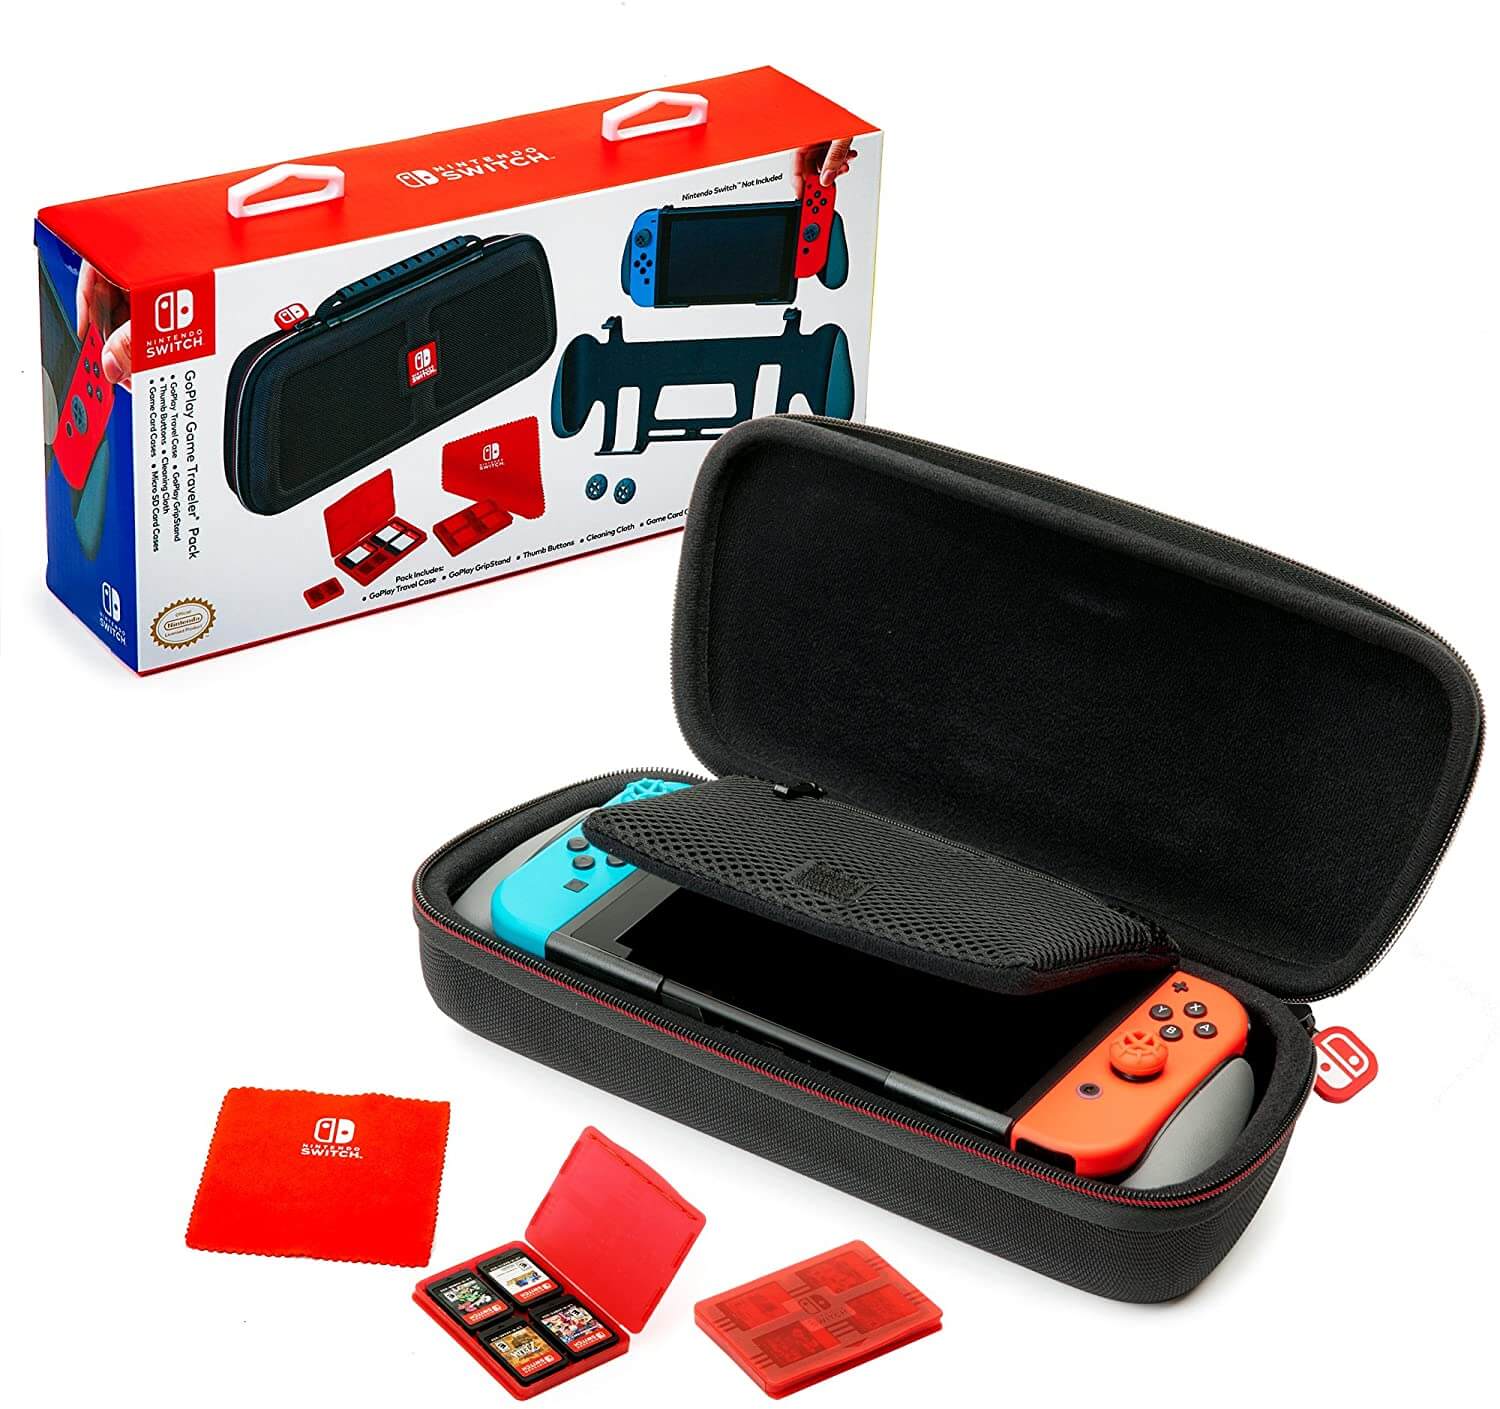 nintendo switch goplay game traveler accessory pack